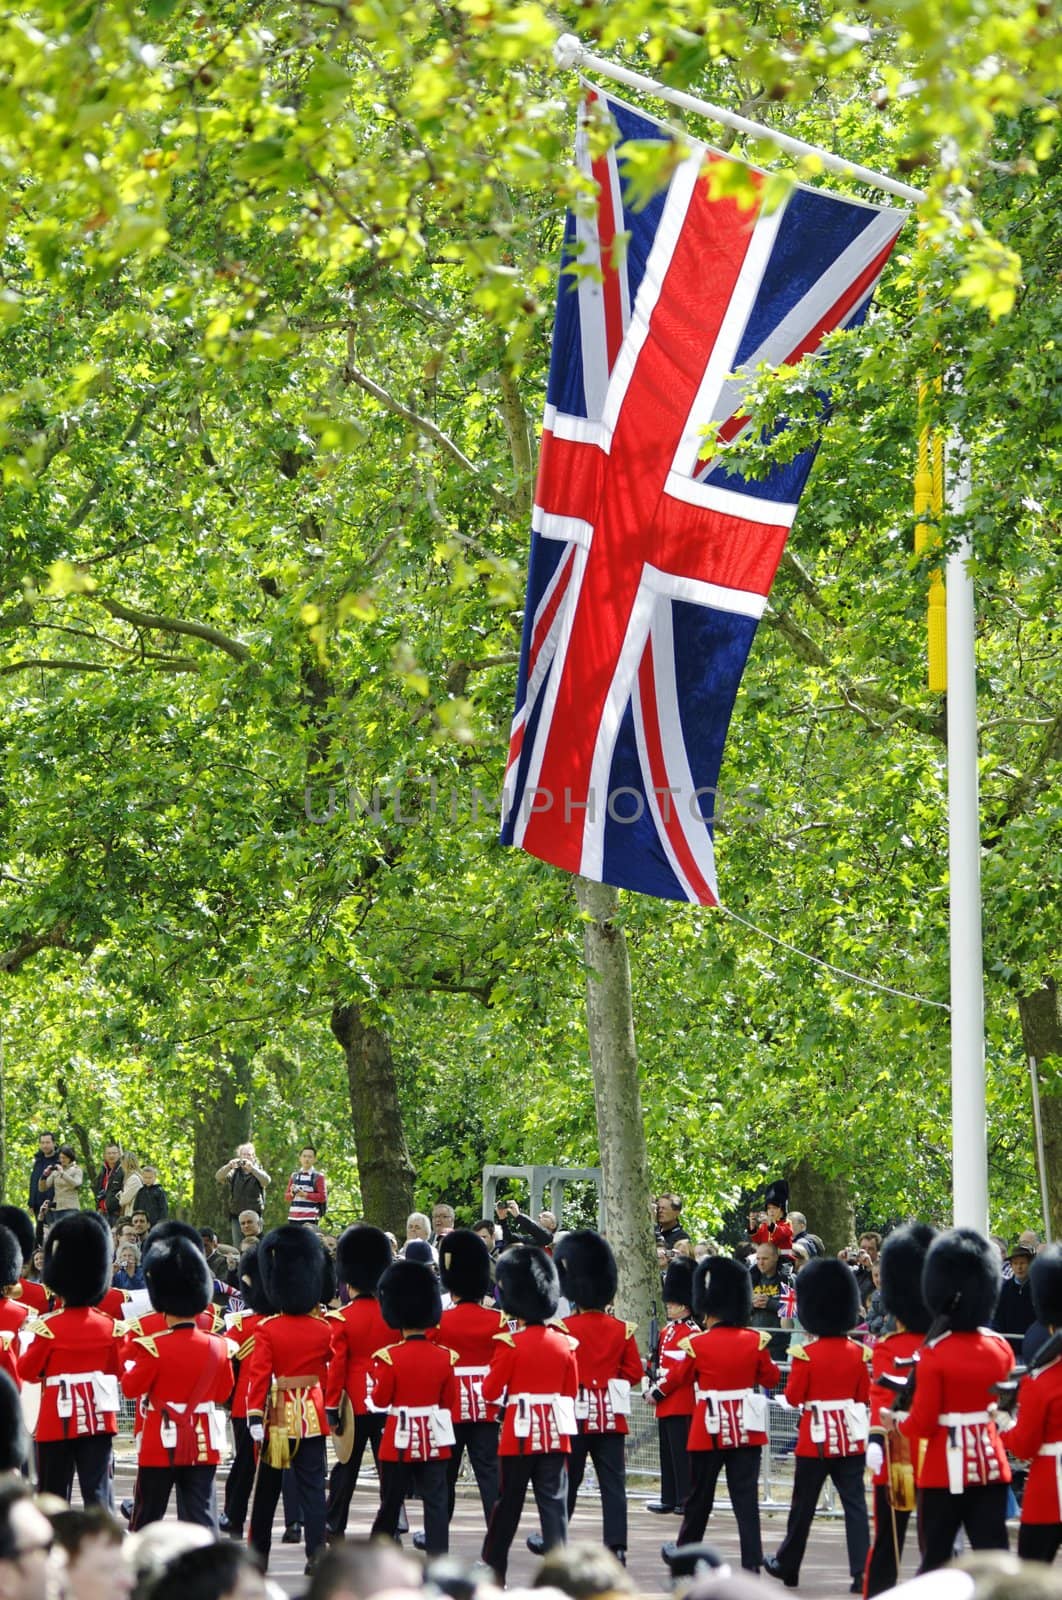 LONDON, UK - June 16: Trooping the Colour ceremony on the Mall and at Buckingham Palace, on June 16, 2012 in London. Trooping the Colour takes place every year in June to officialy celebrate the sovereign birthday.